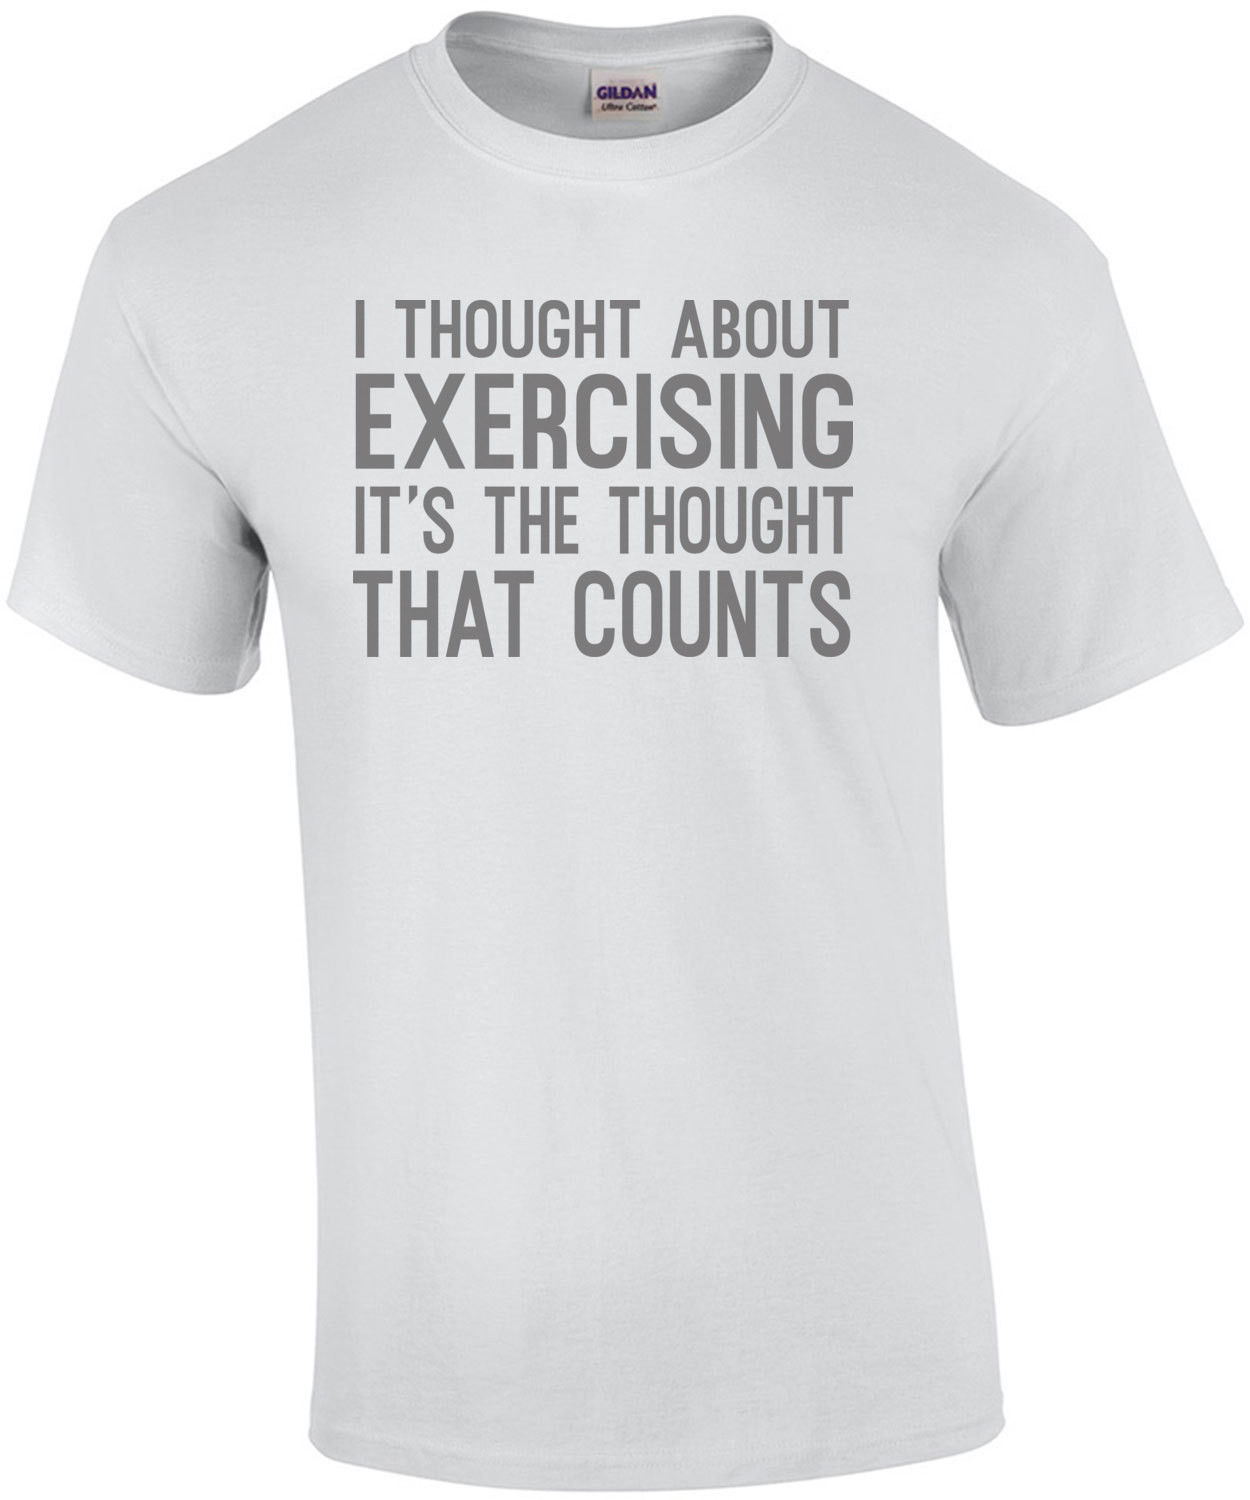 I thought about exercising it's the thought that counts - funny exercising t-shirt